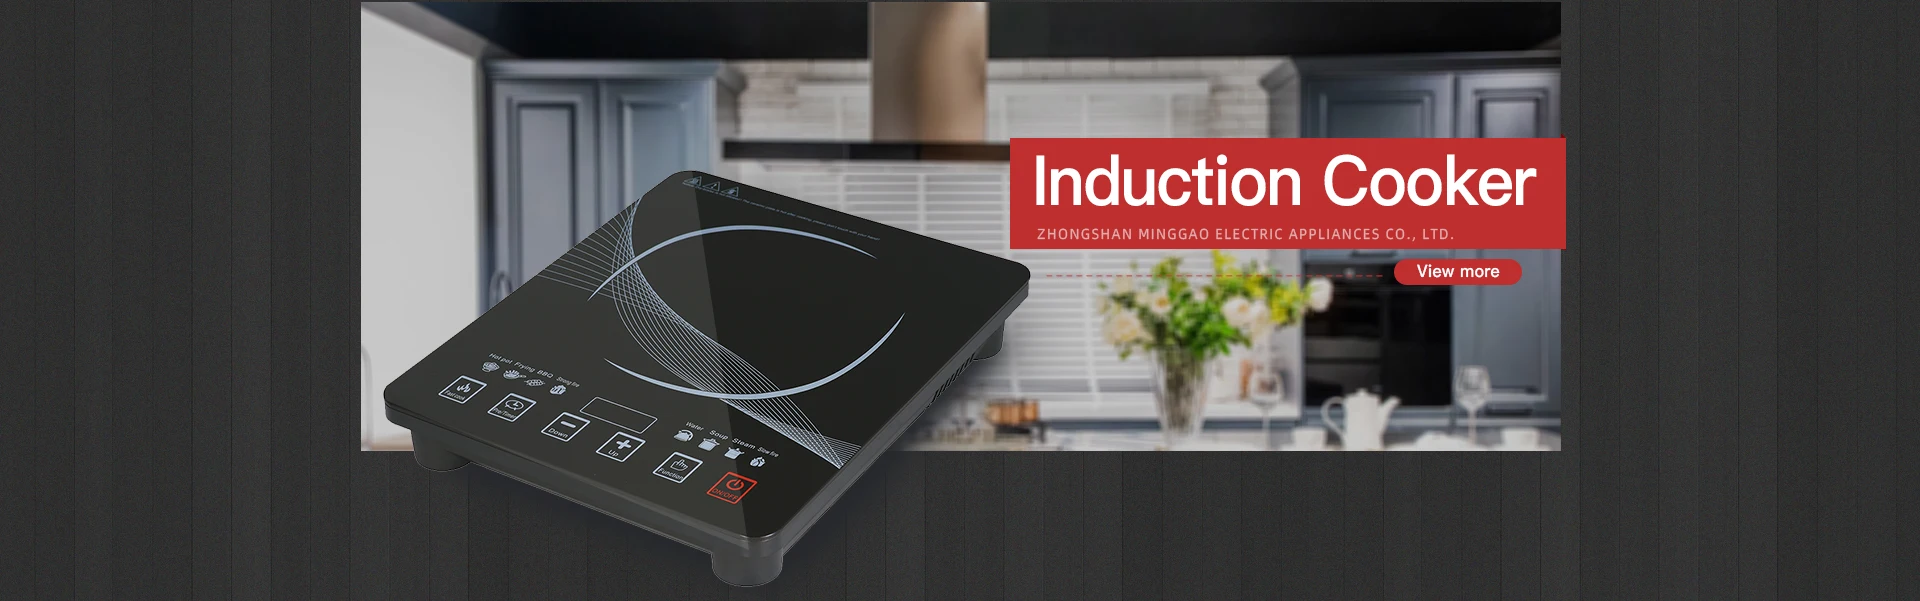 induction cooker all company